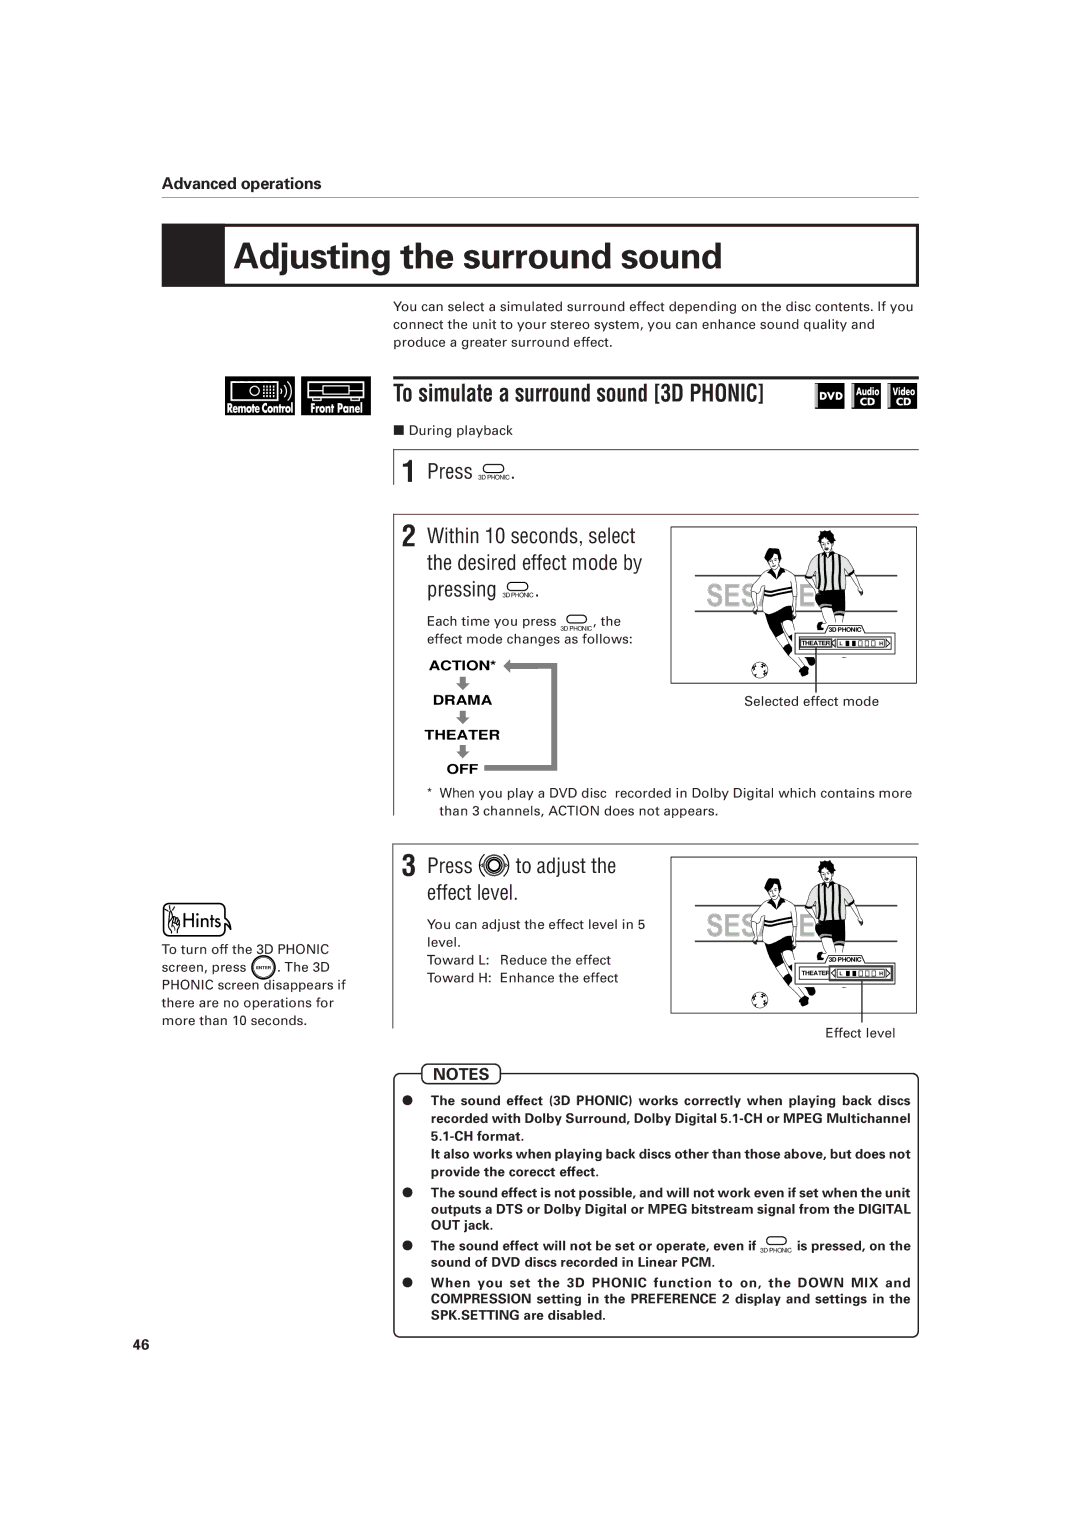 JVC XV-D701BK manual Adjusting the surround sound, To simulate a surround sound 3D Phonic, Press to adjust the effect level 